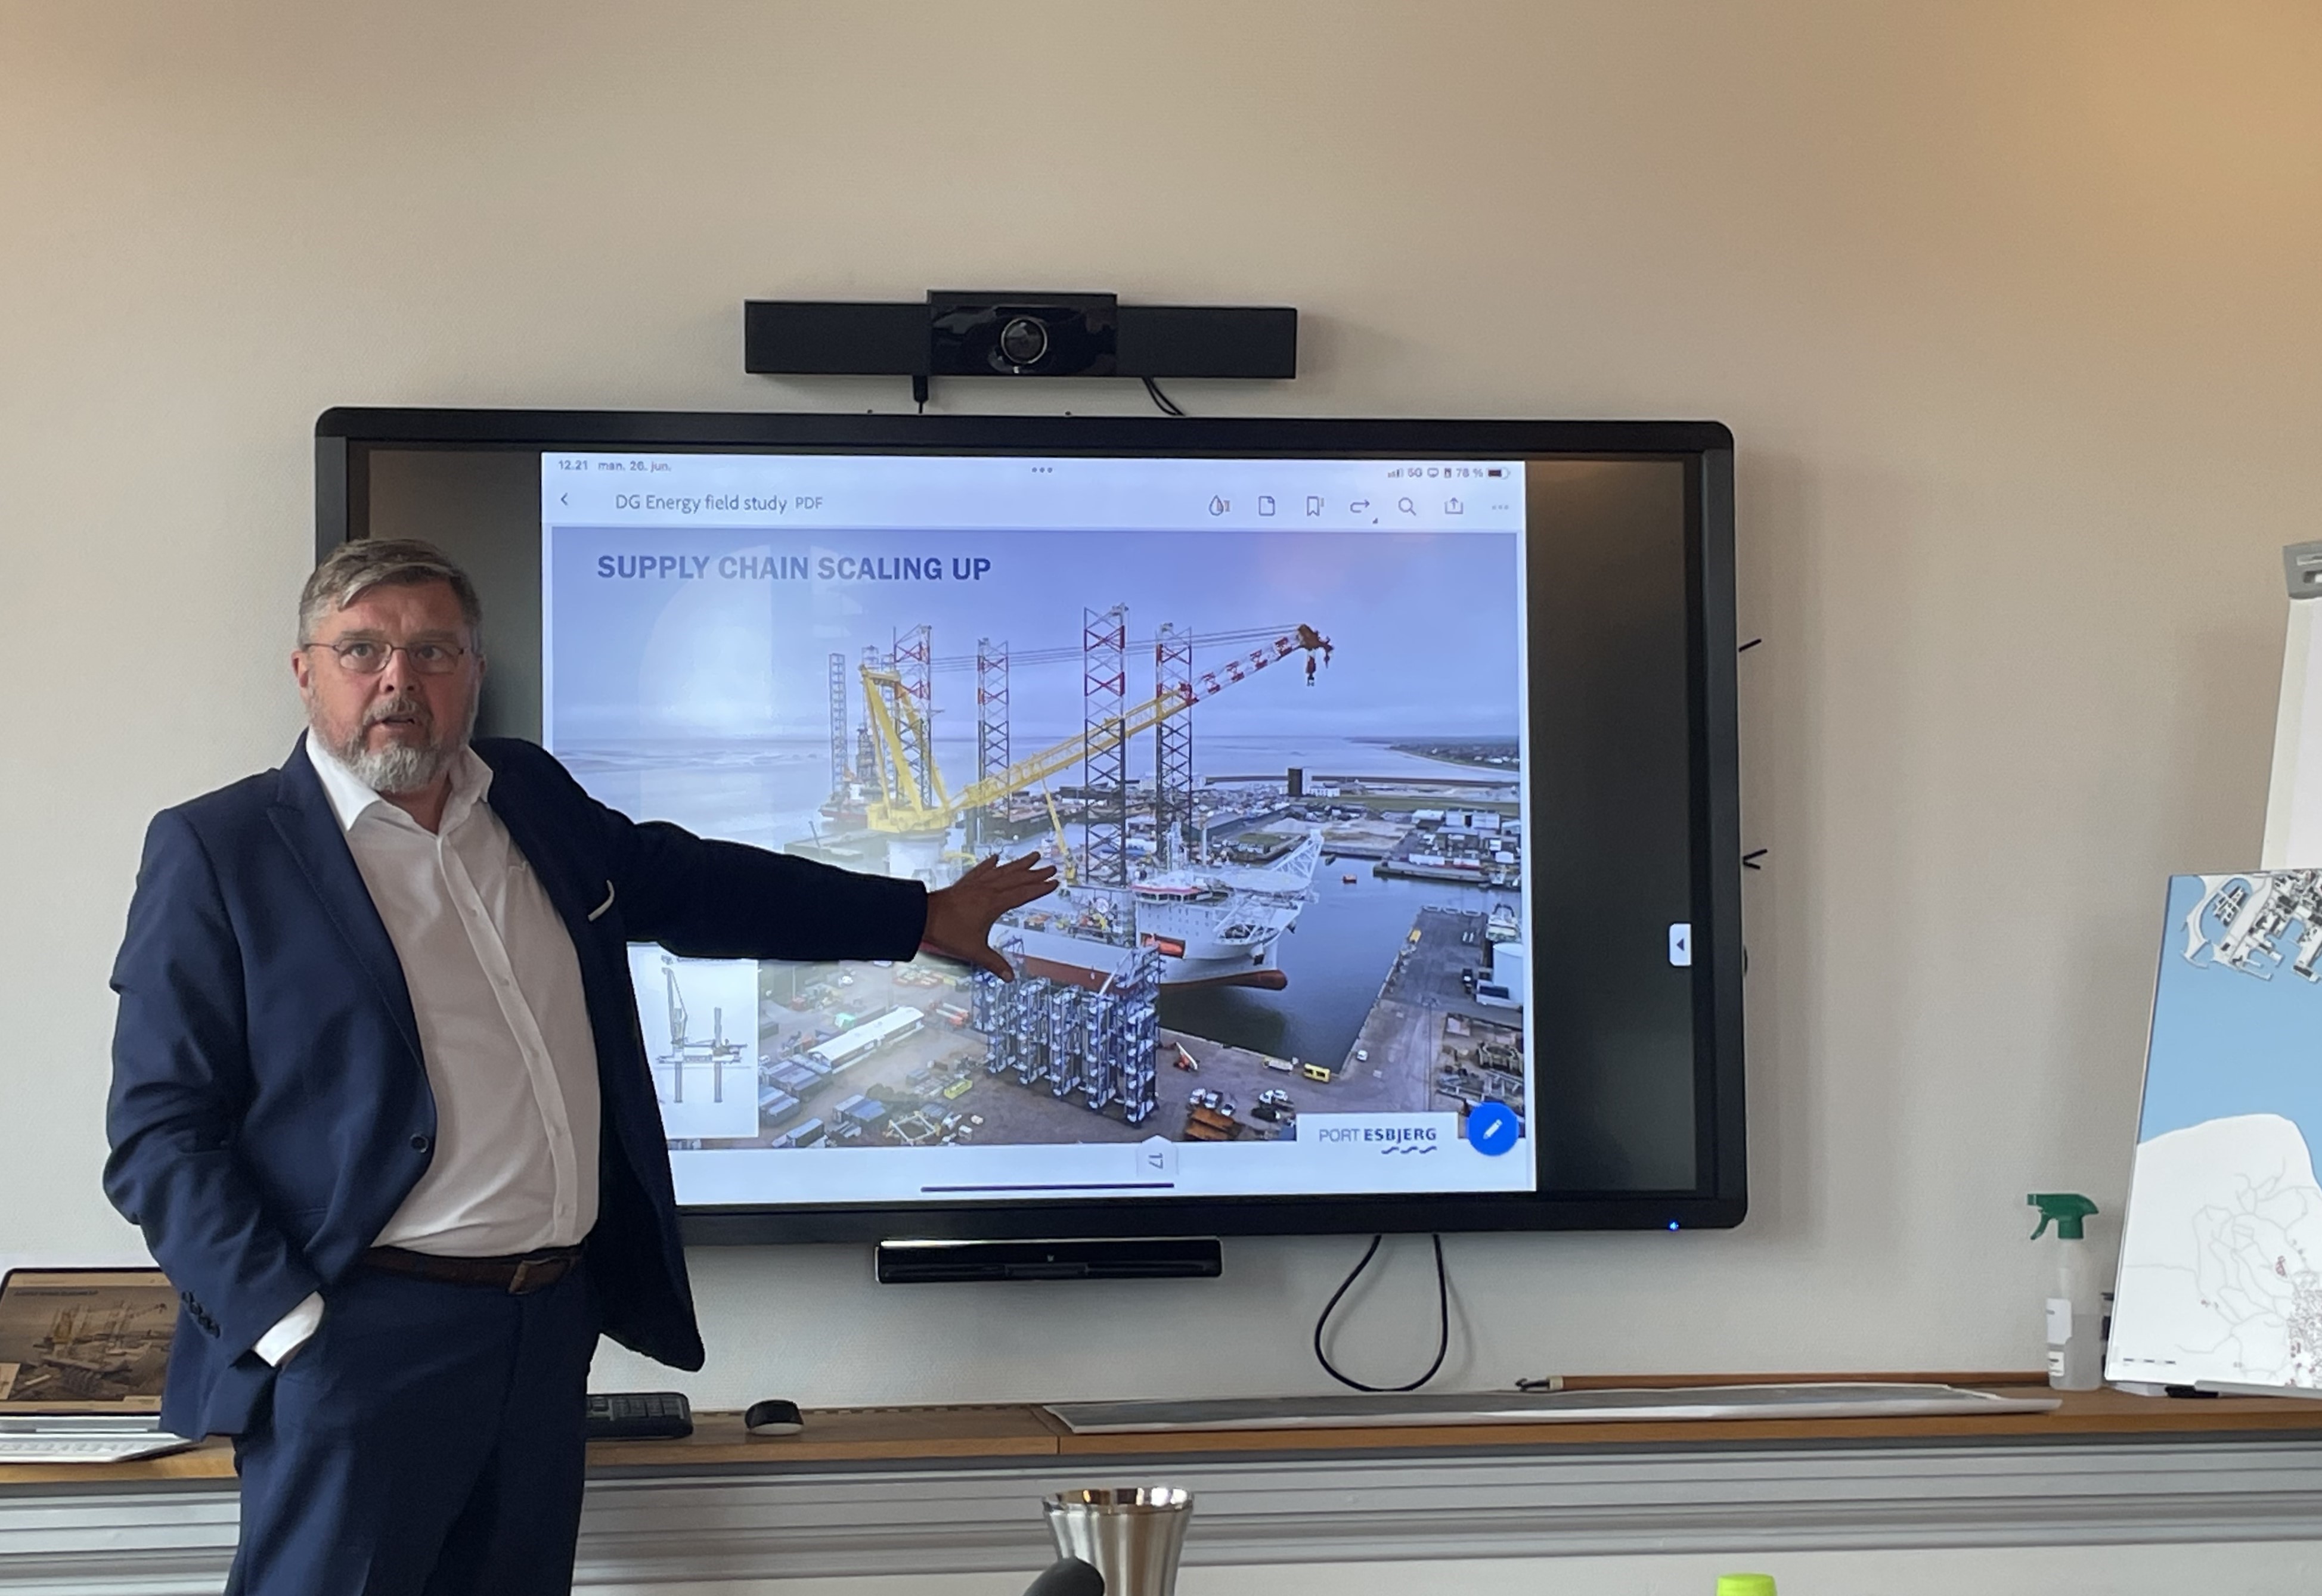 Port Esbjerg: Lack of Personnel as Specialized Vessels Create Specialized Jobs